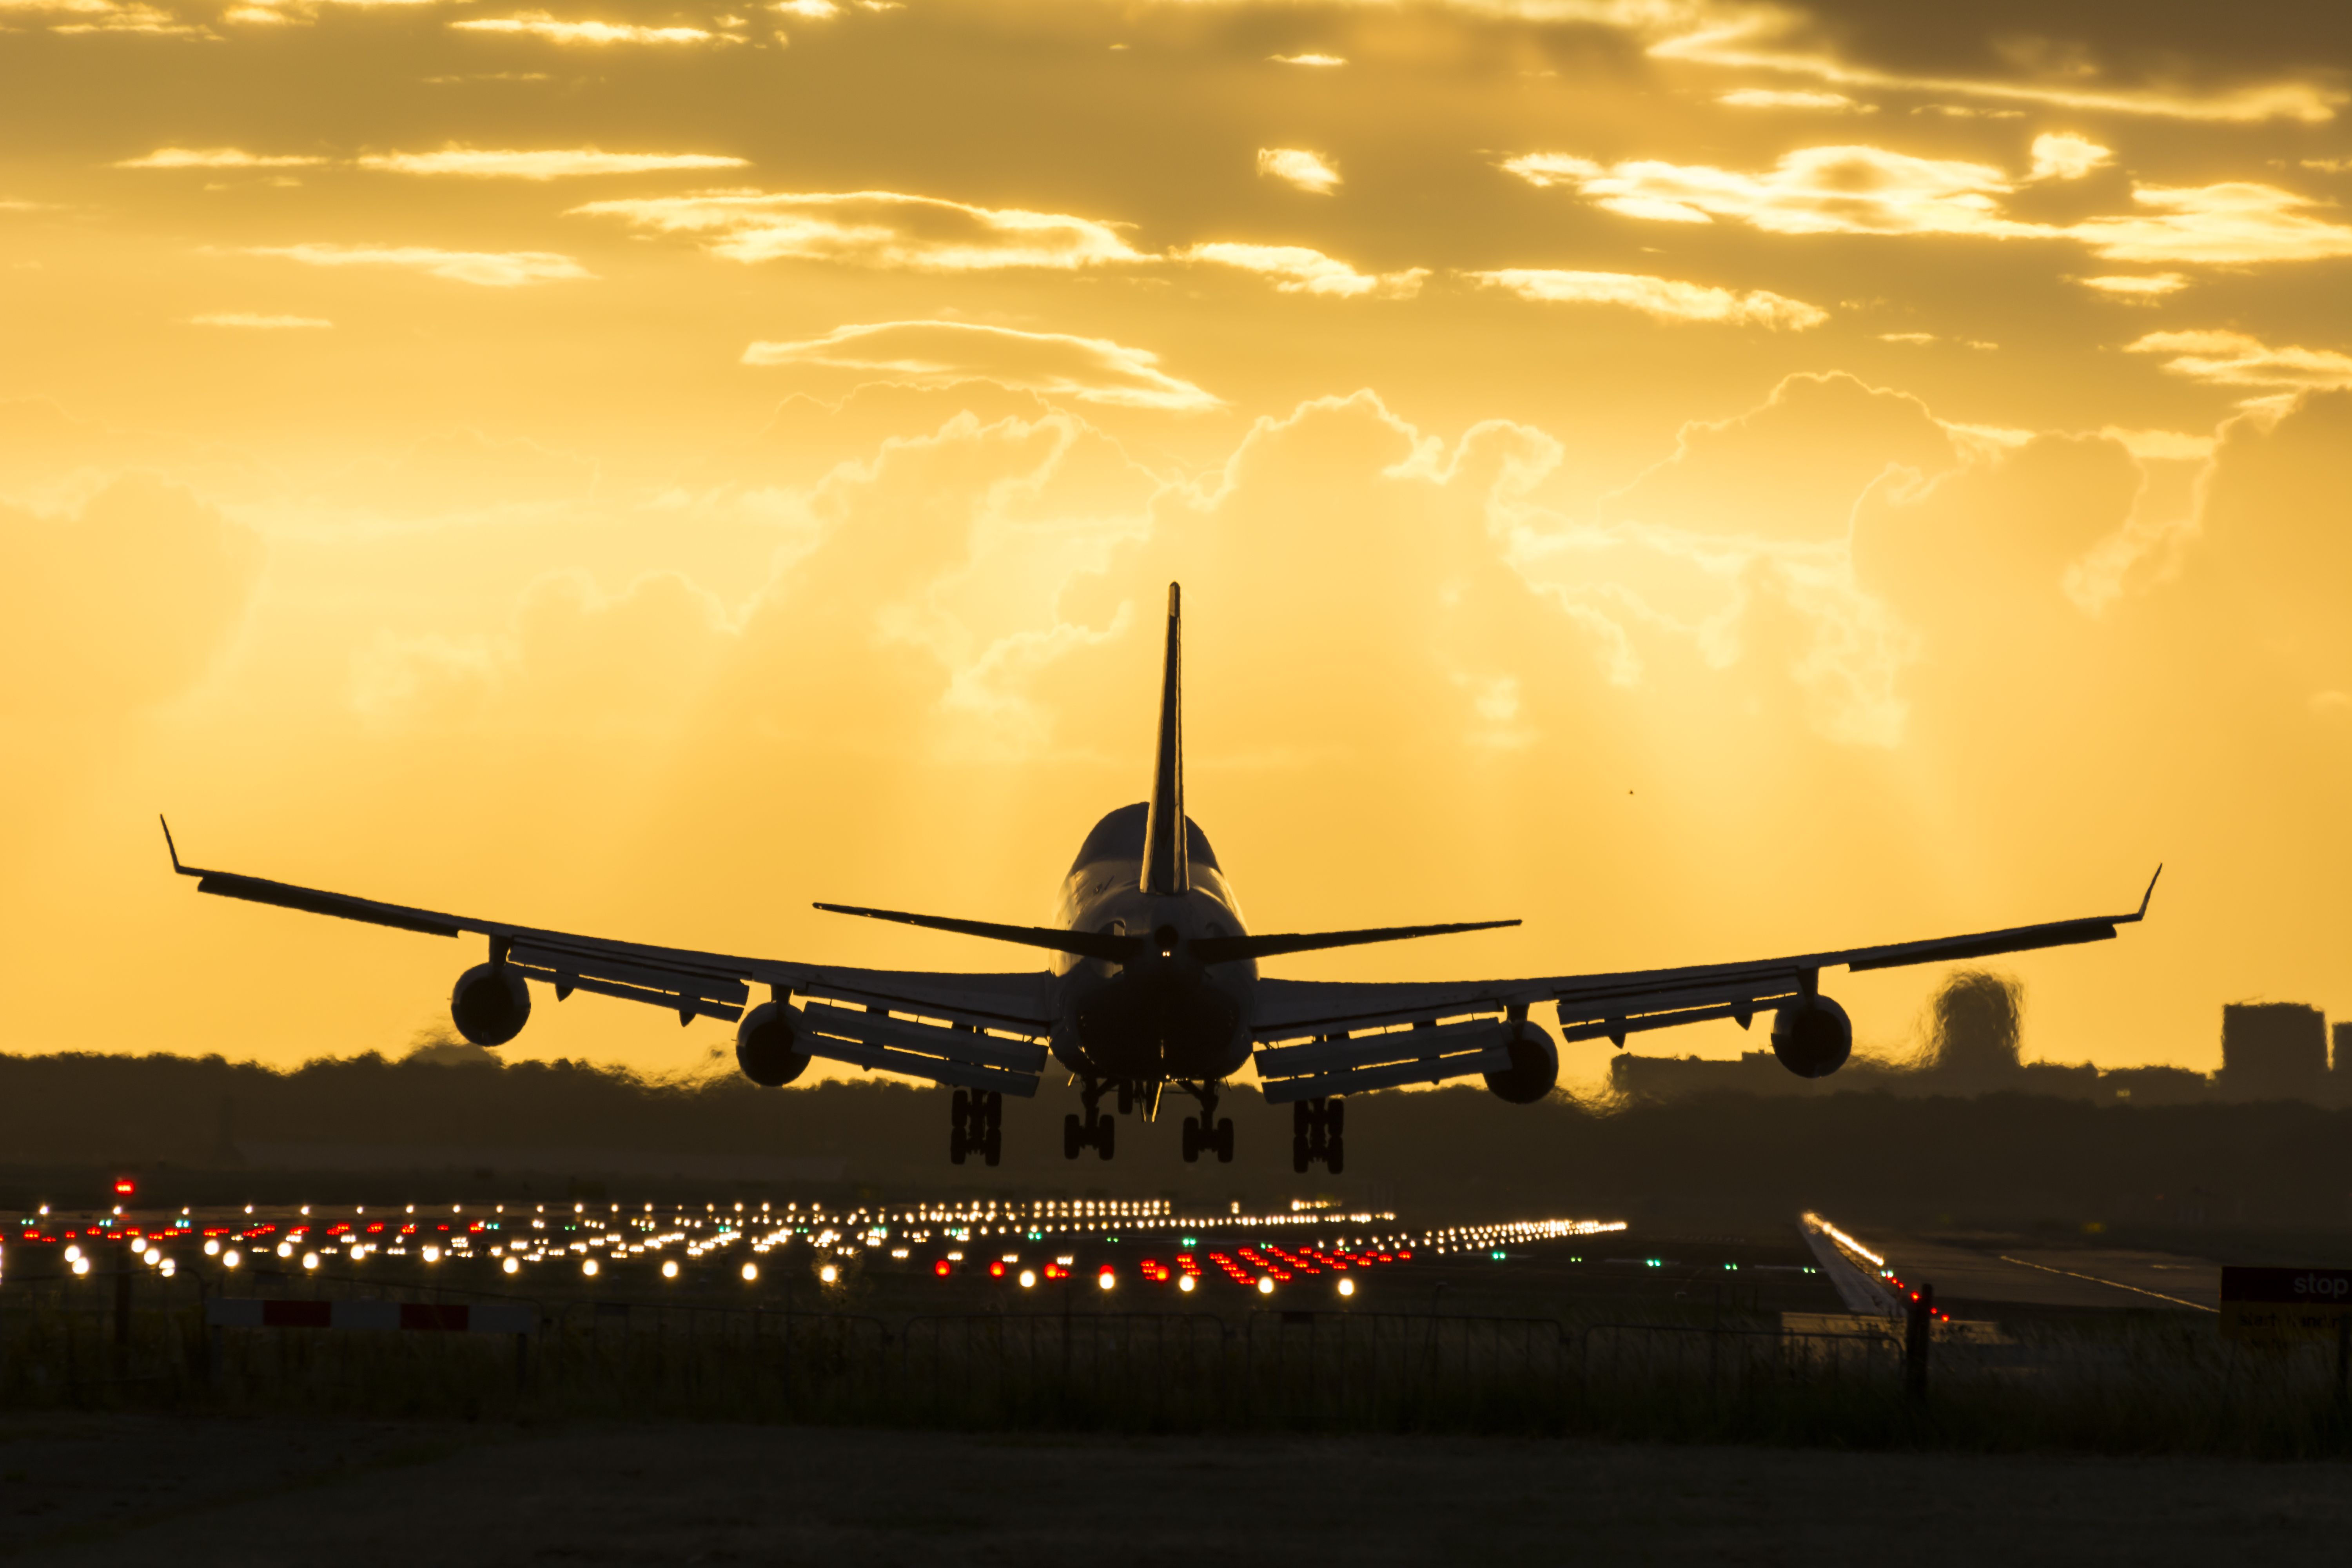 The Silhouette of a Boeing 747 landing at sunset.